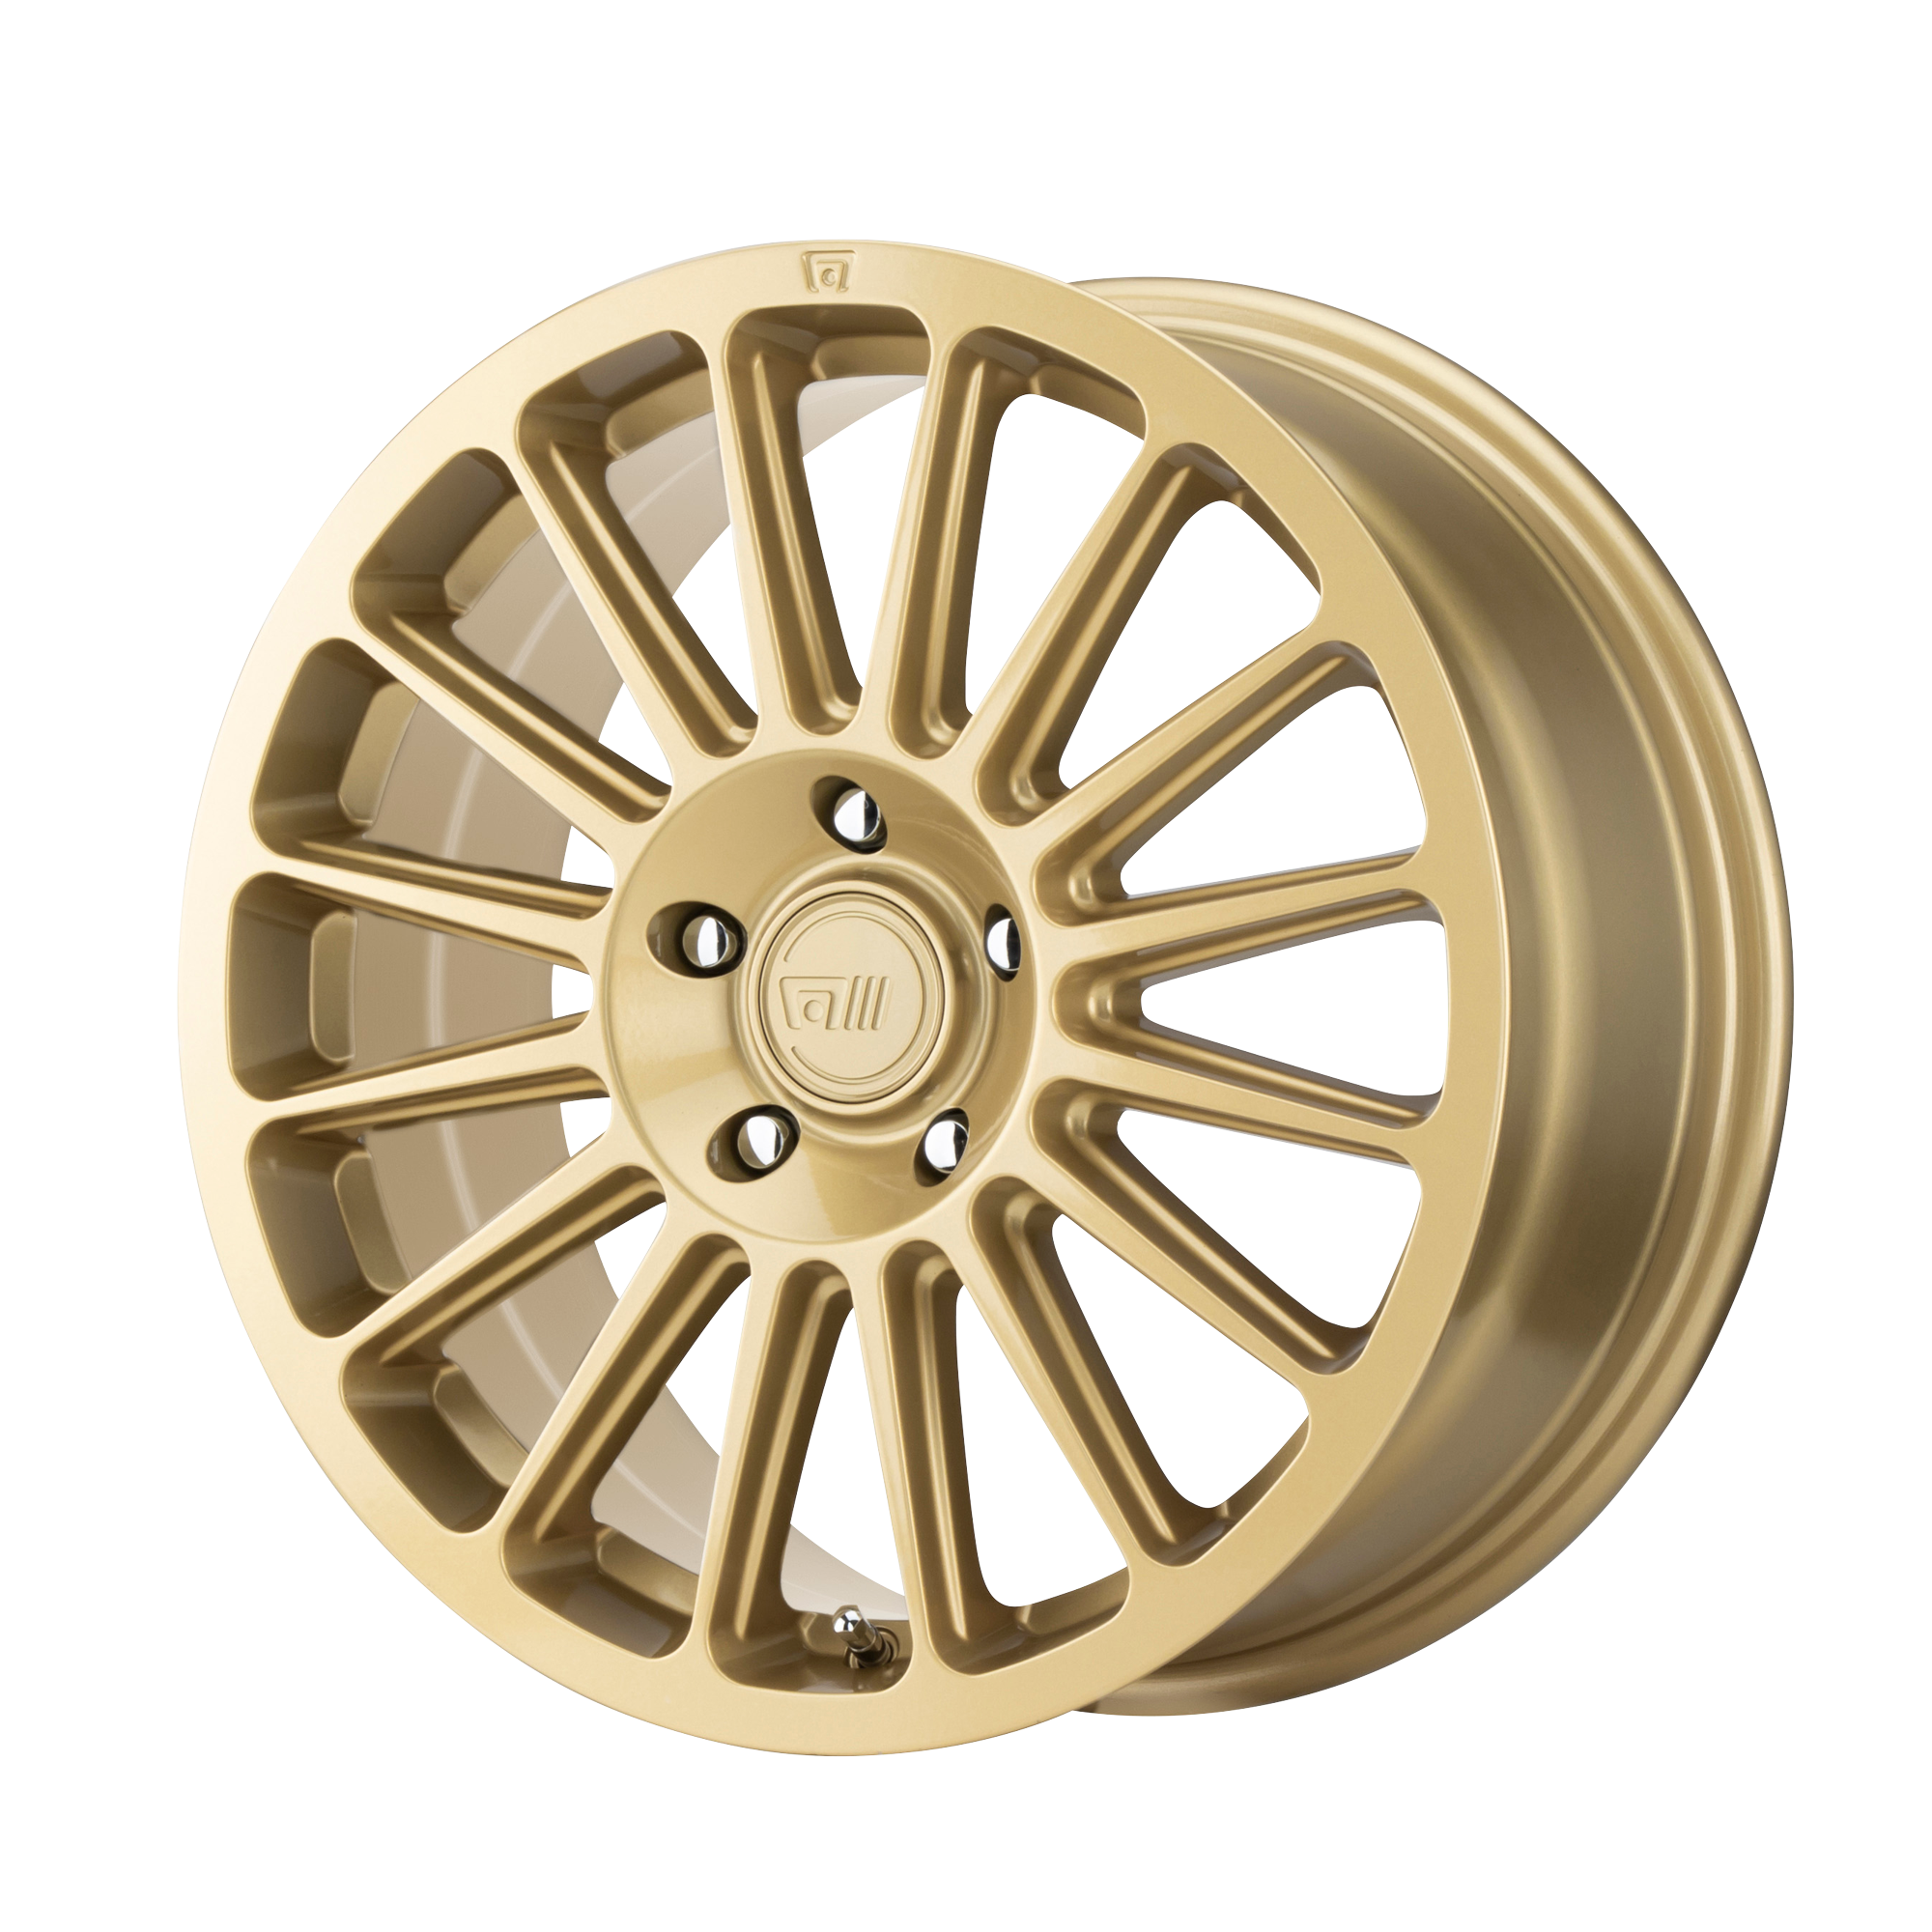 MR141 17x7.5 5x114.30 RALLY GOLD (40 mm) - Tires and Engine Performance